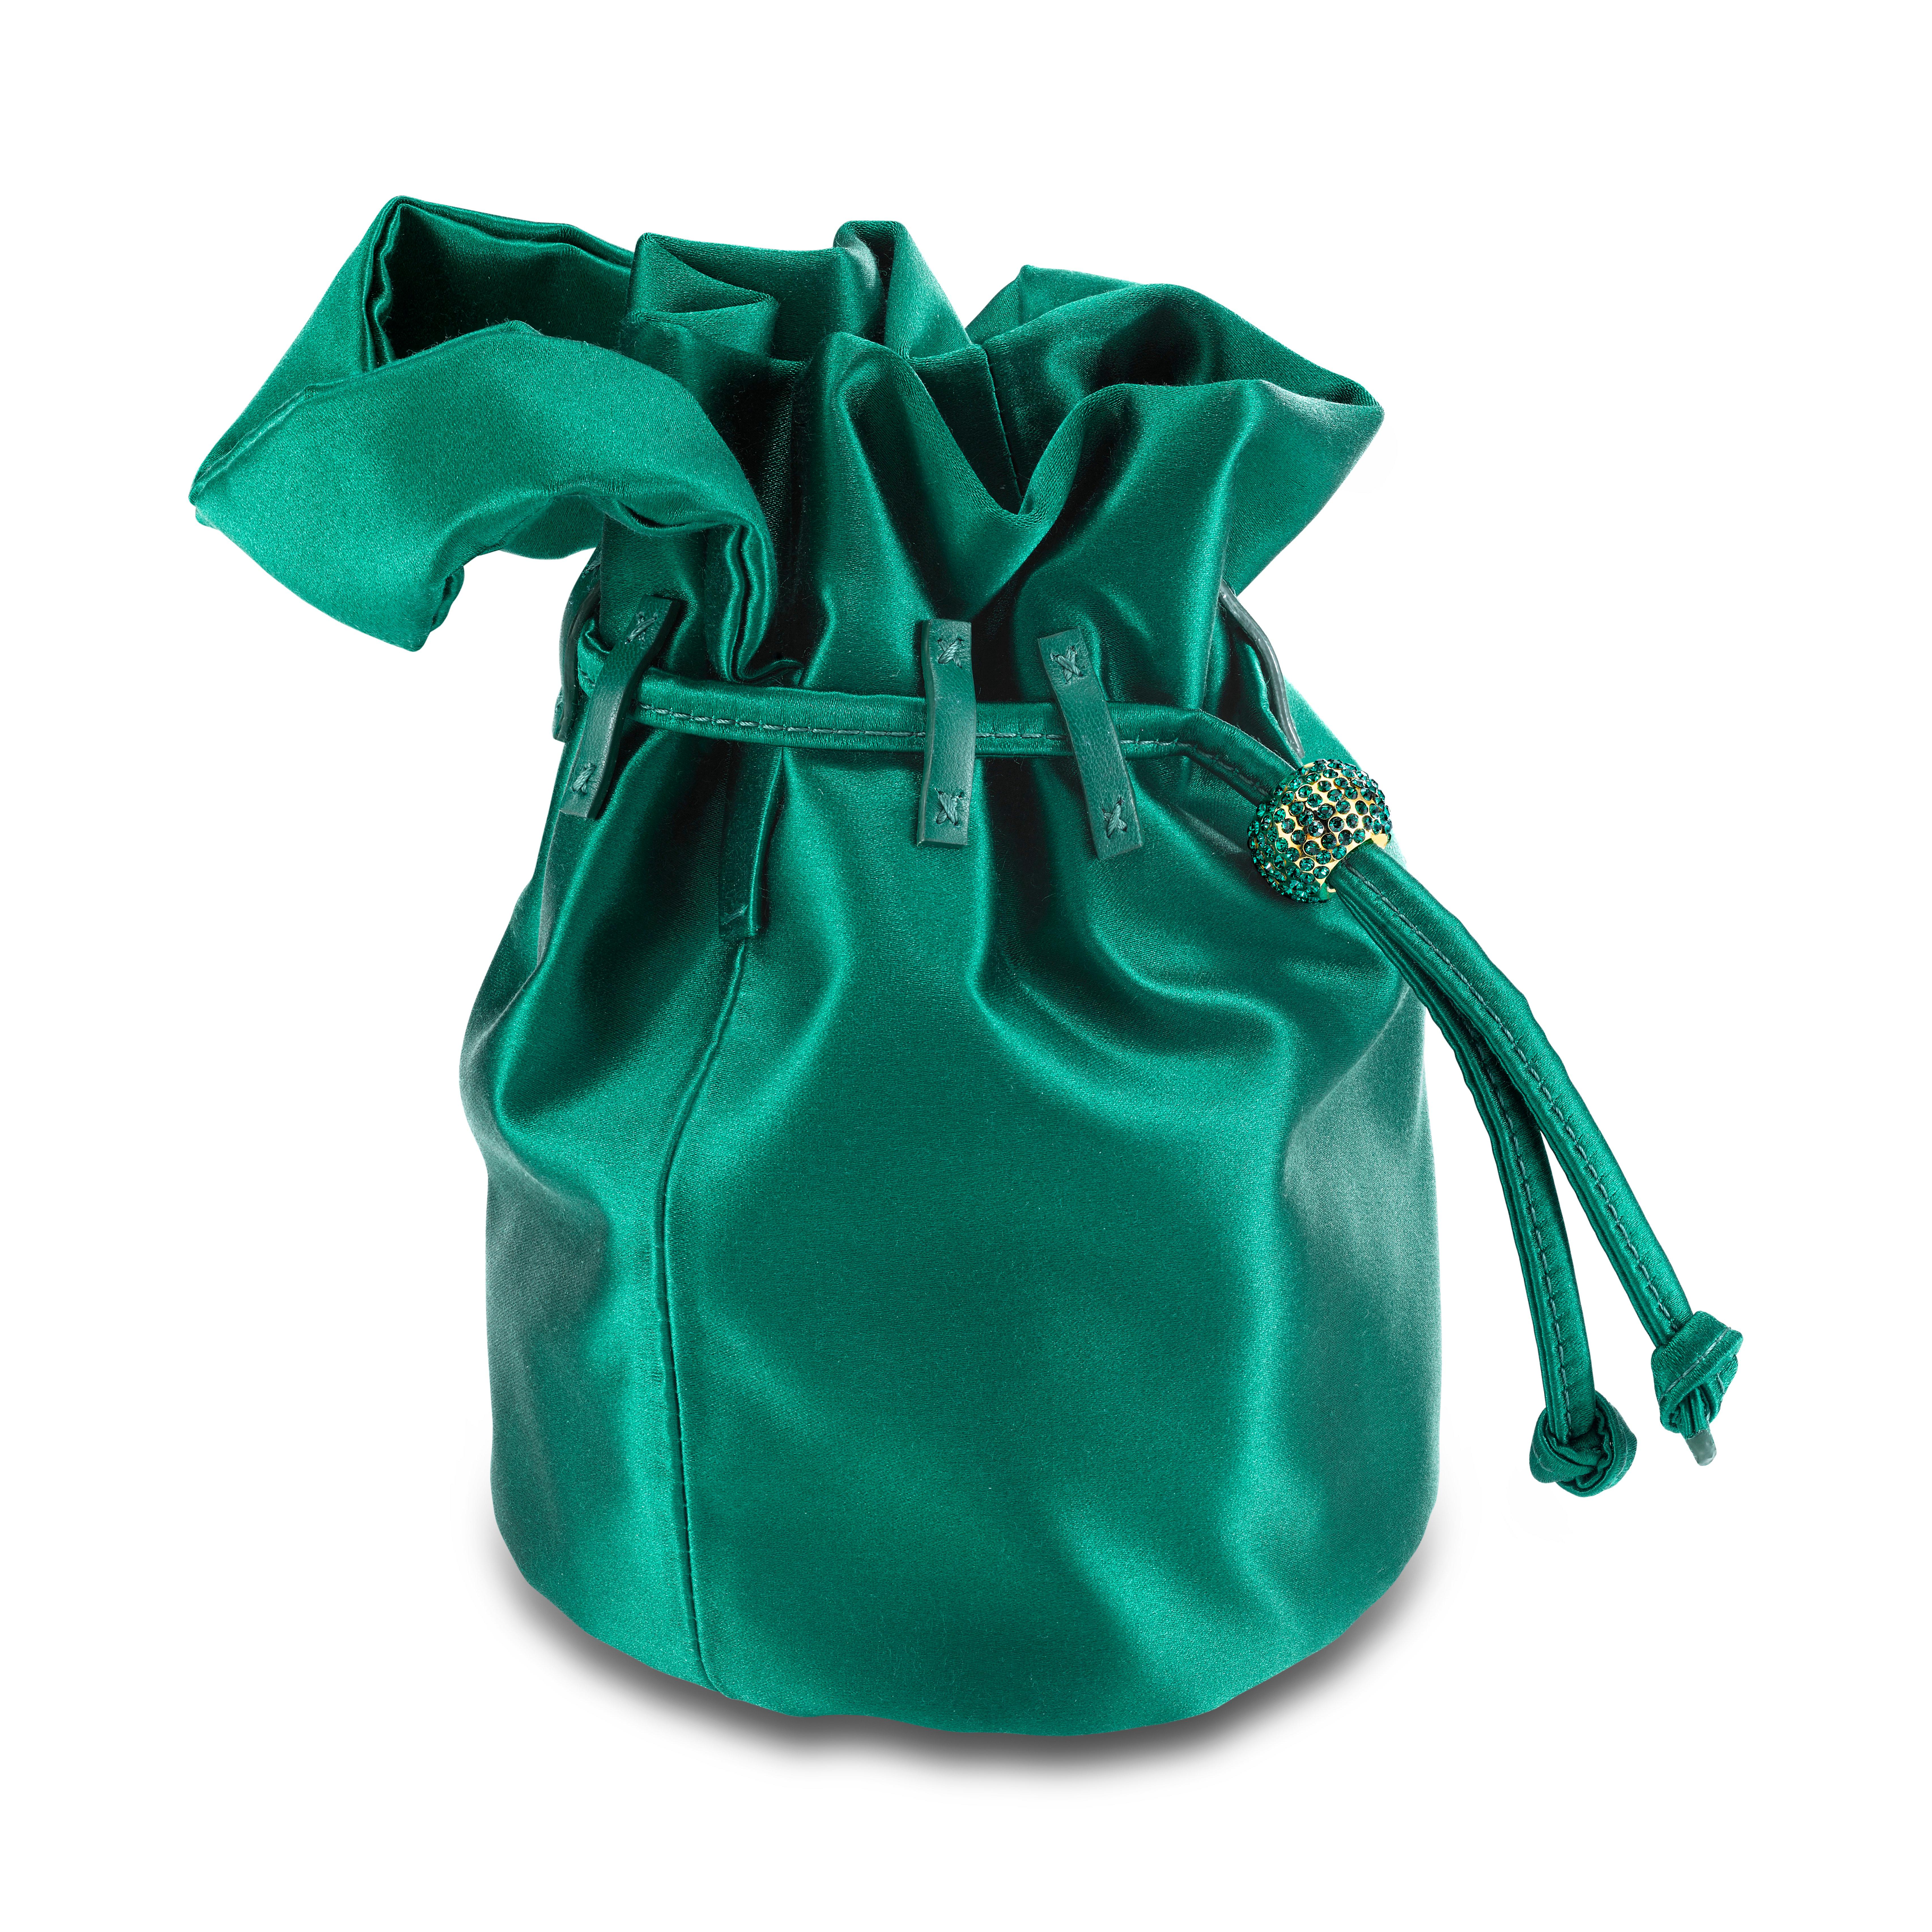 The Grace Mini is featured in our Emerald satin. This soft pouch has a satin handle and drawstring closure. The closure is embellished with Swarovski crystals and gold hardware. It fits the large iPhone, has interior card slots and features our